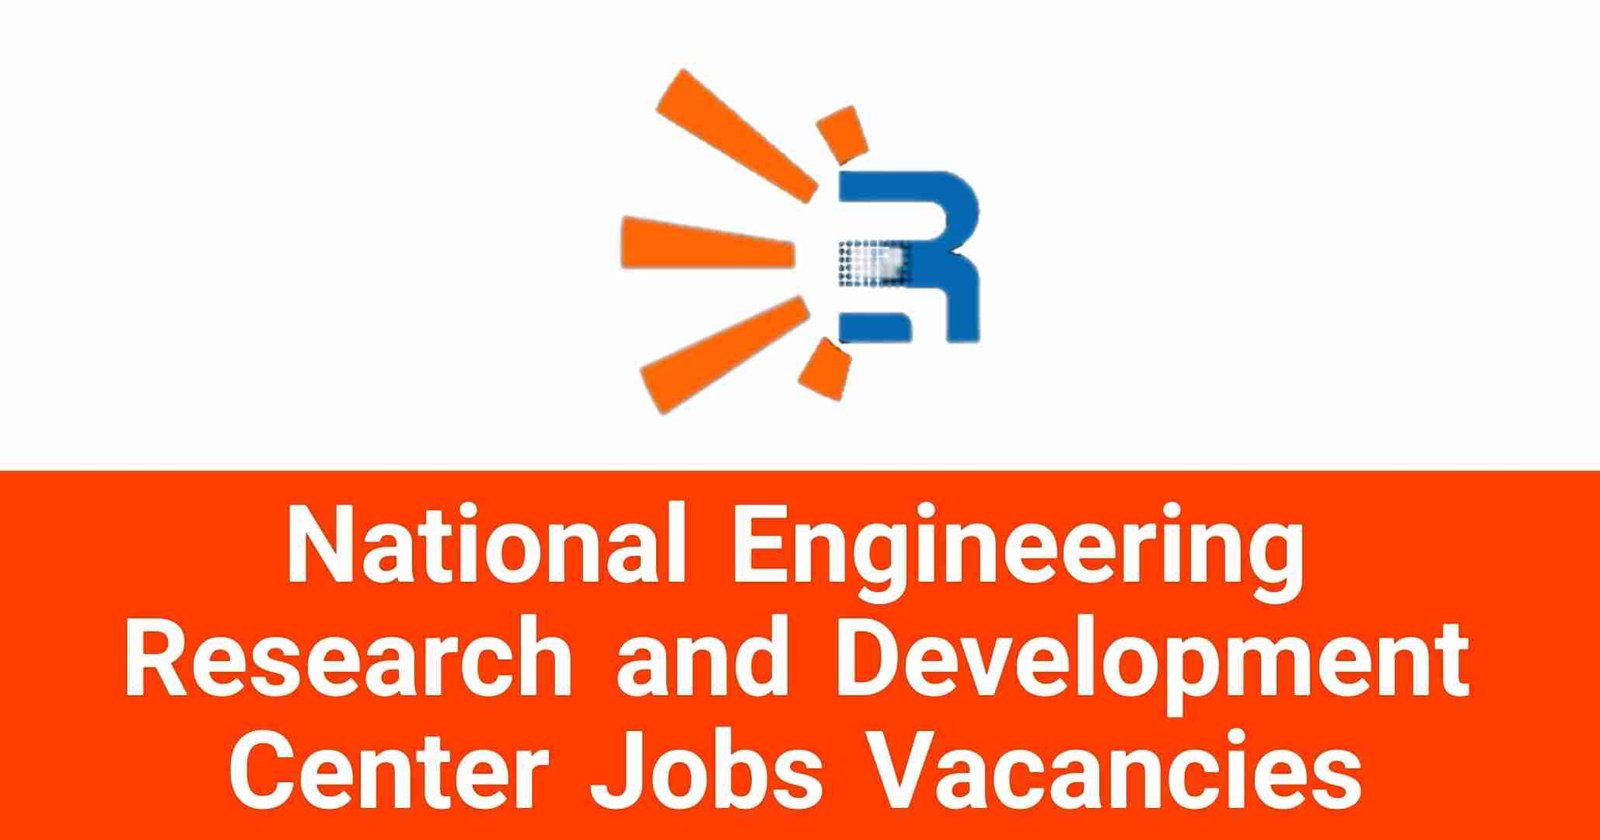 National Engineering Research and Development Center Jobs Vacancies